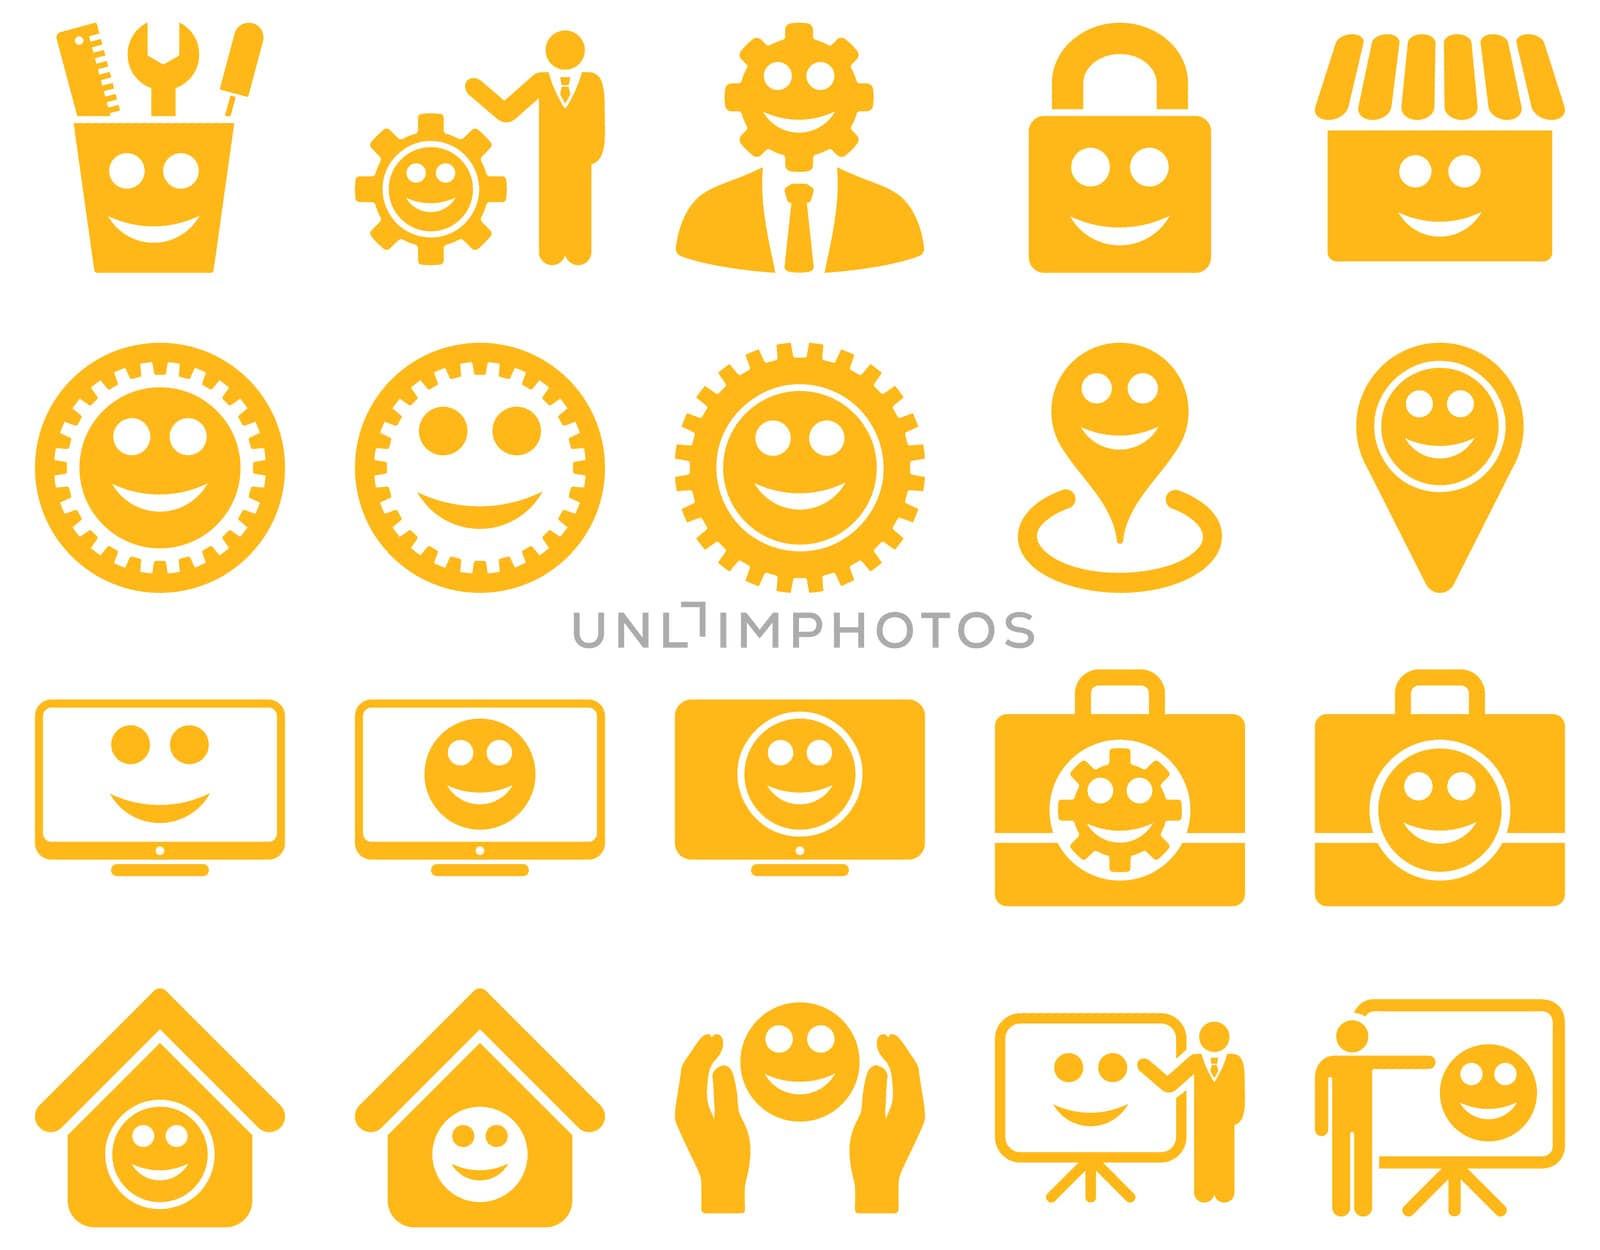 Tools, gears, smiles, management icons. Glyph set style is flat images, yellow symbols, isolated on a white background.